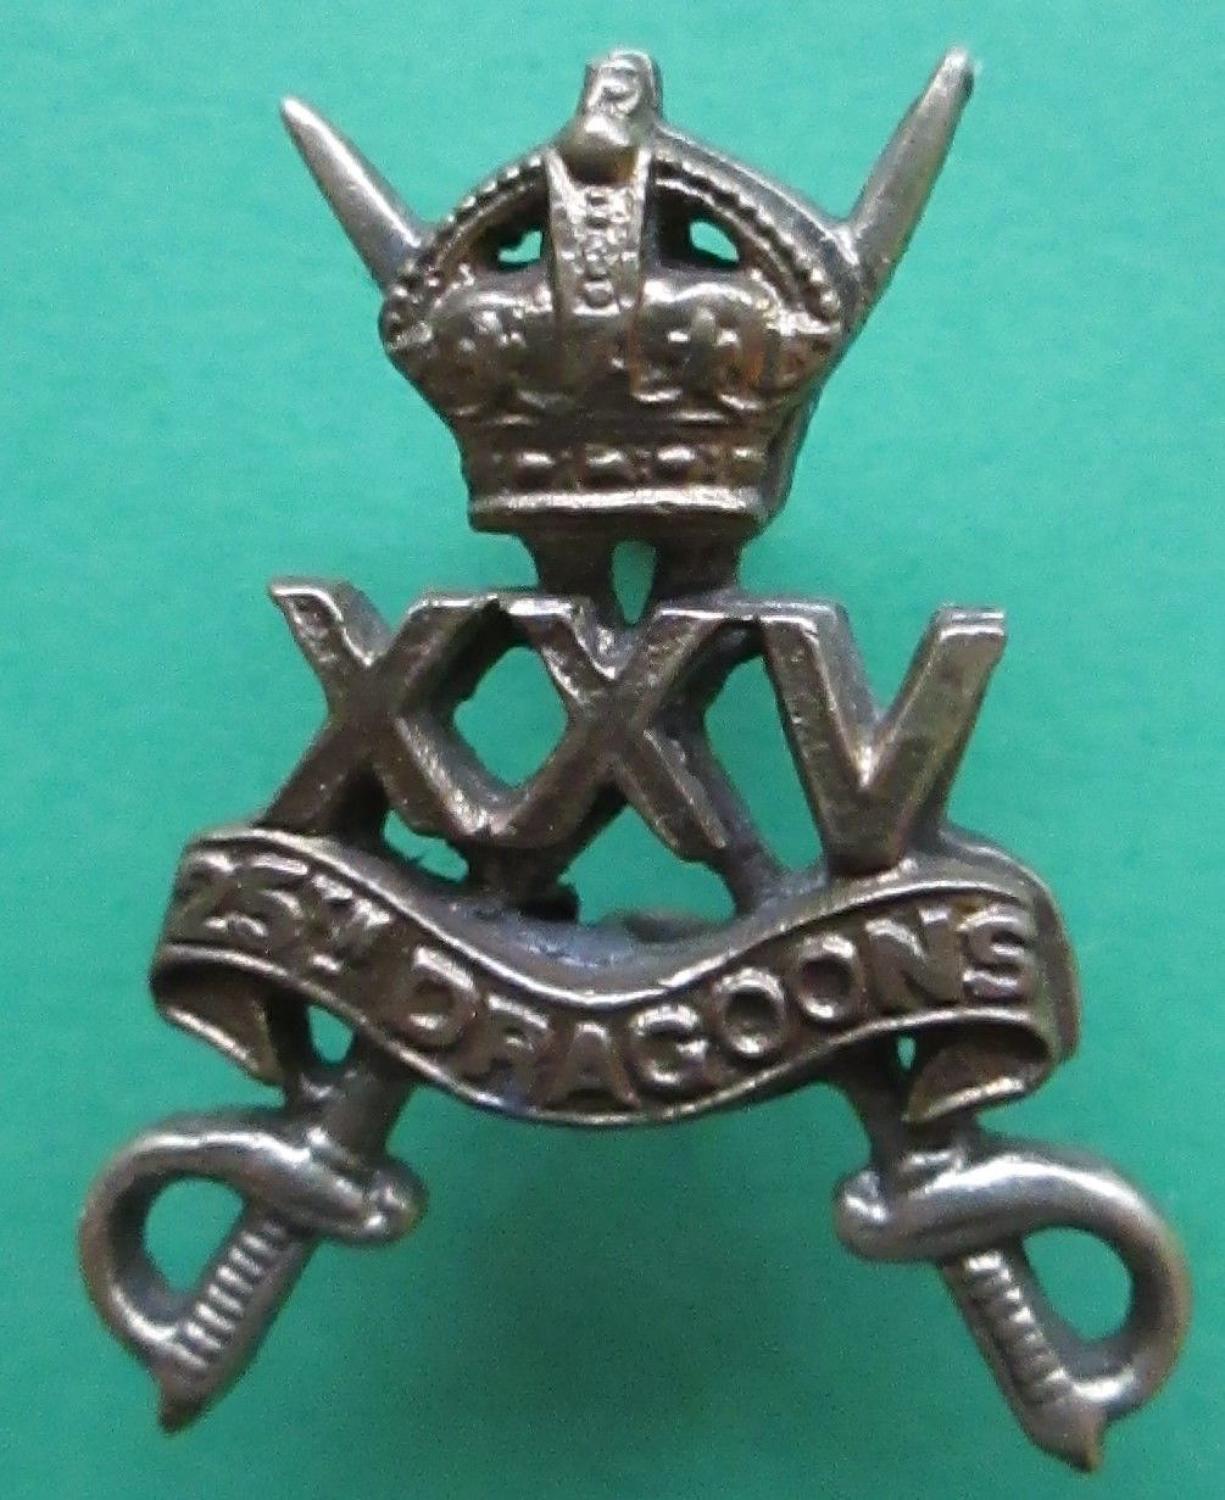 A GOOD SCARCE EXAMPLE OF THE 25th DRAGOONS CAP BADGE